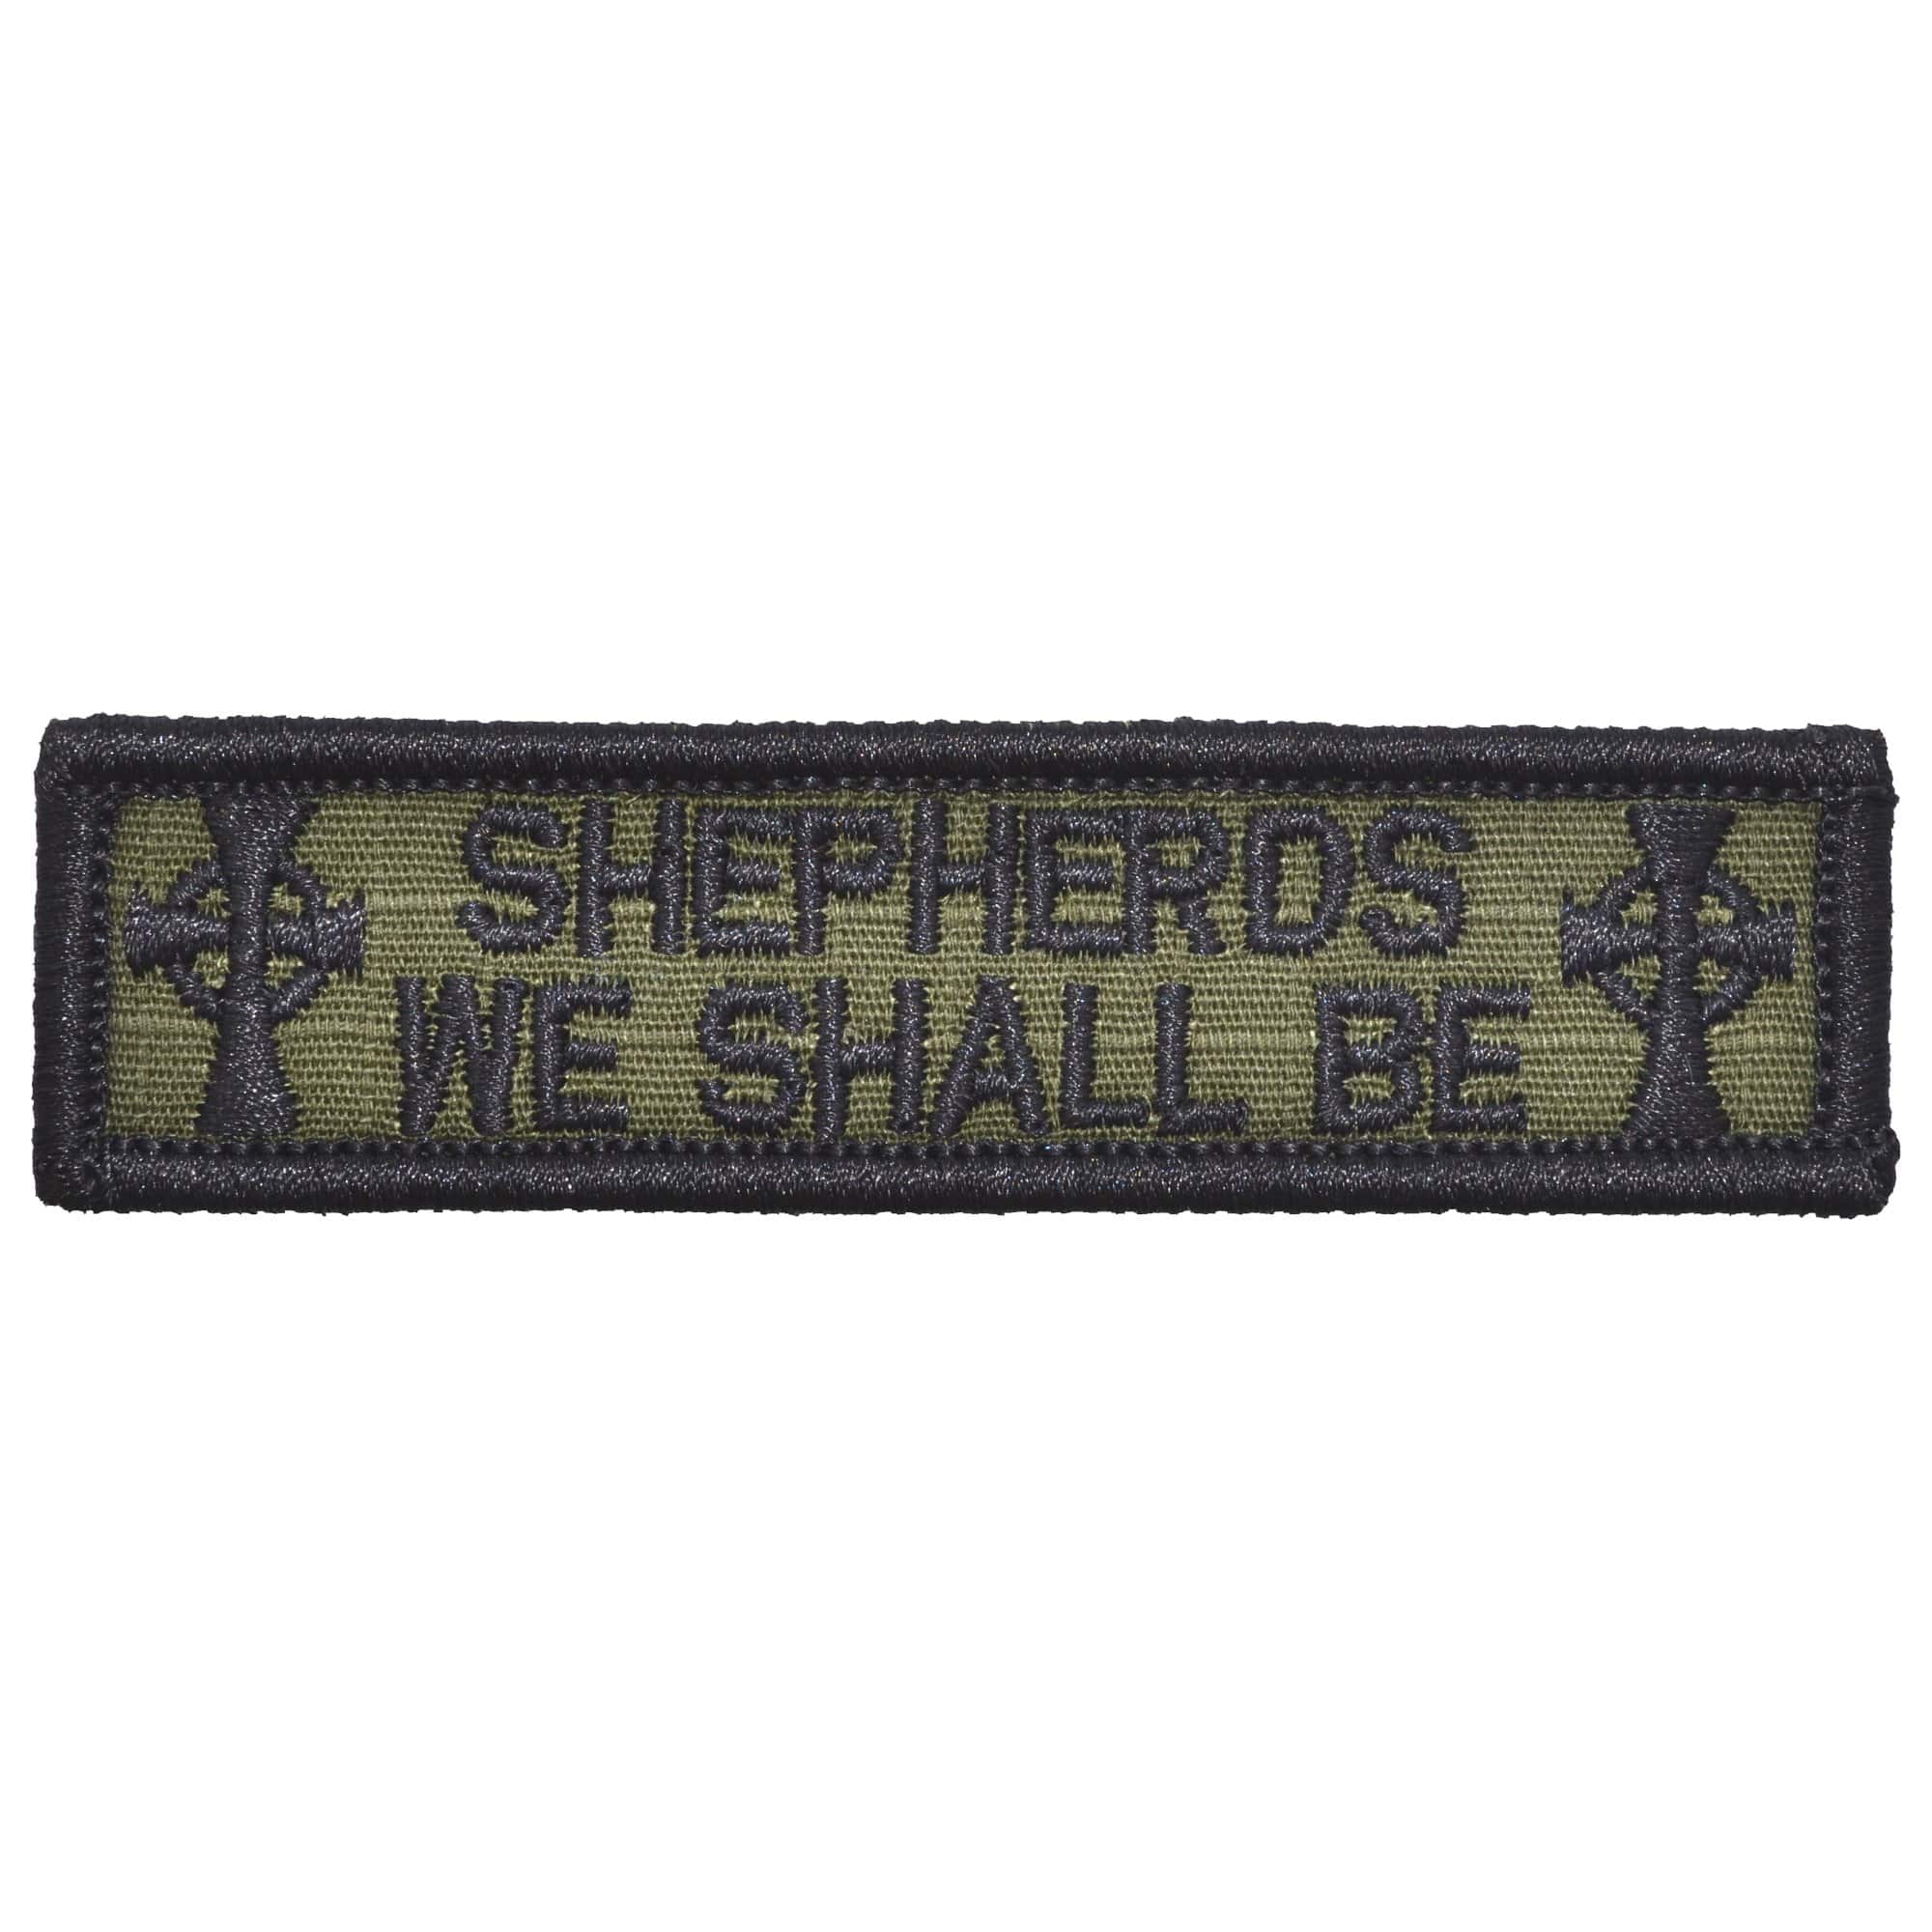 Tactical Gear Junkie Patches Olive Drab Shepherds We Shall Be Boondock Saints- 1x3.75 Patch